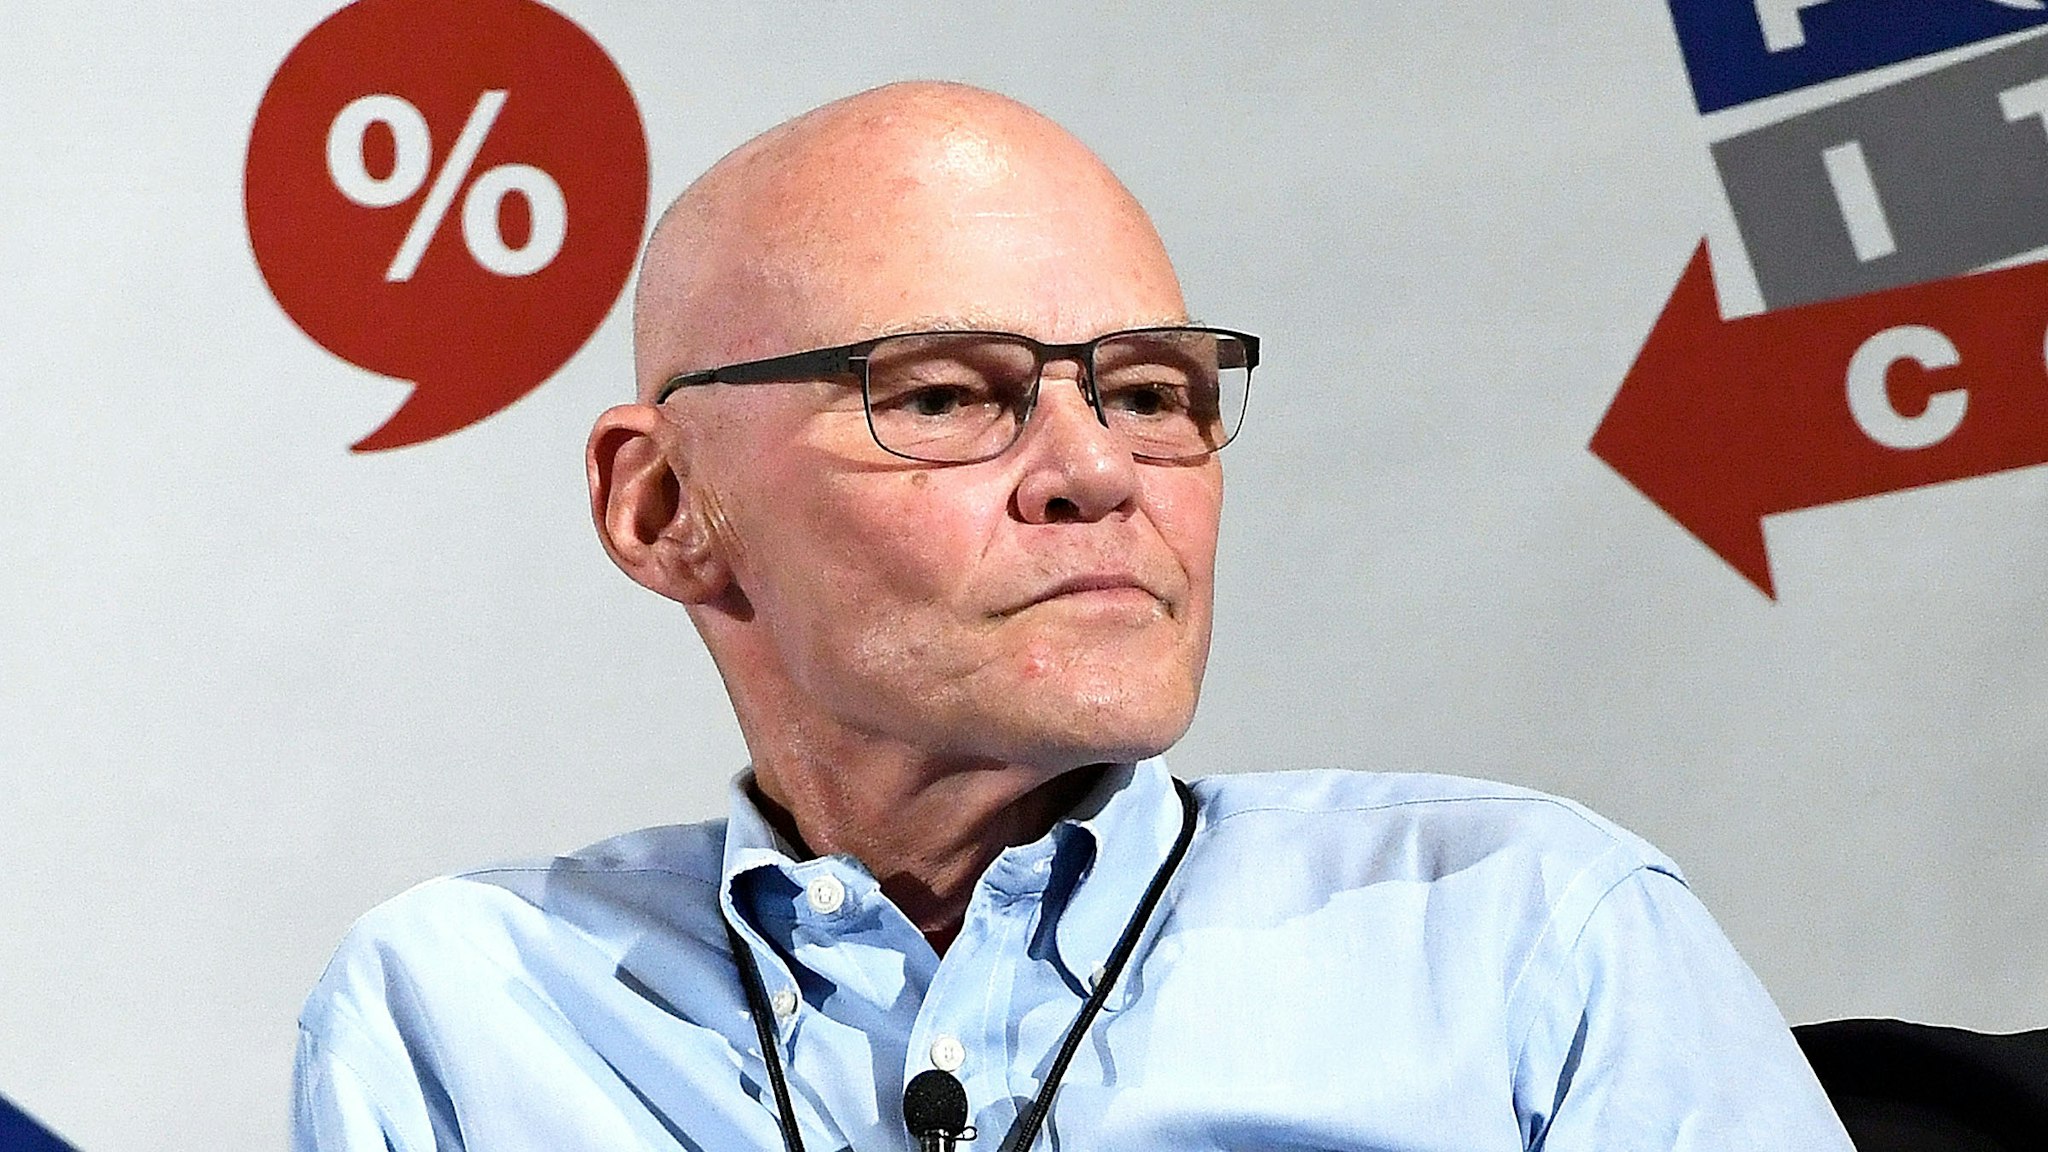 PASADENA, CA - JULY 29: James Carville speaks during his appearance at Politicon 2017 at Pasadena Convention Center on July 29, 2017 in Pasadena, California.